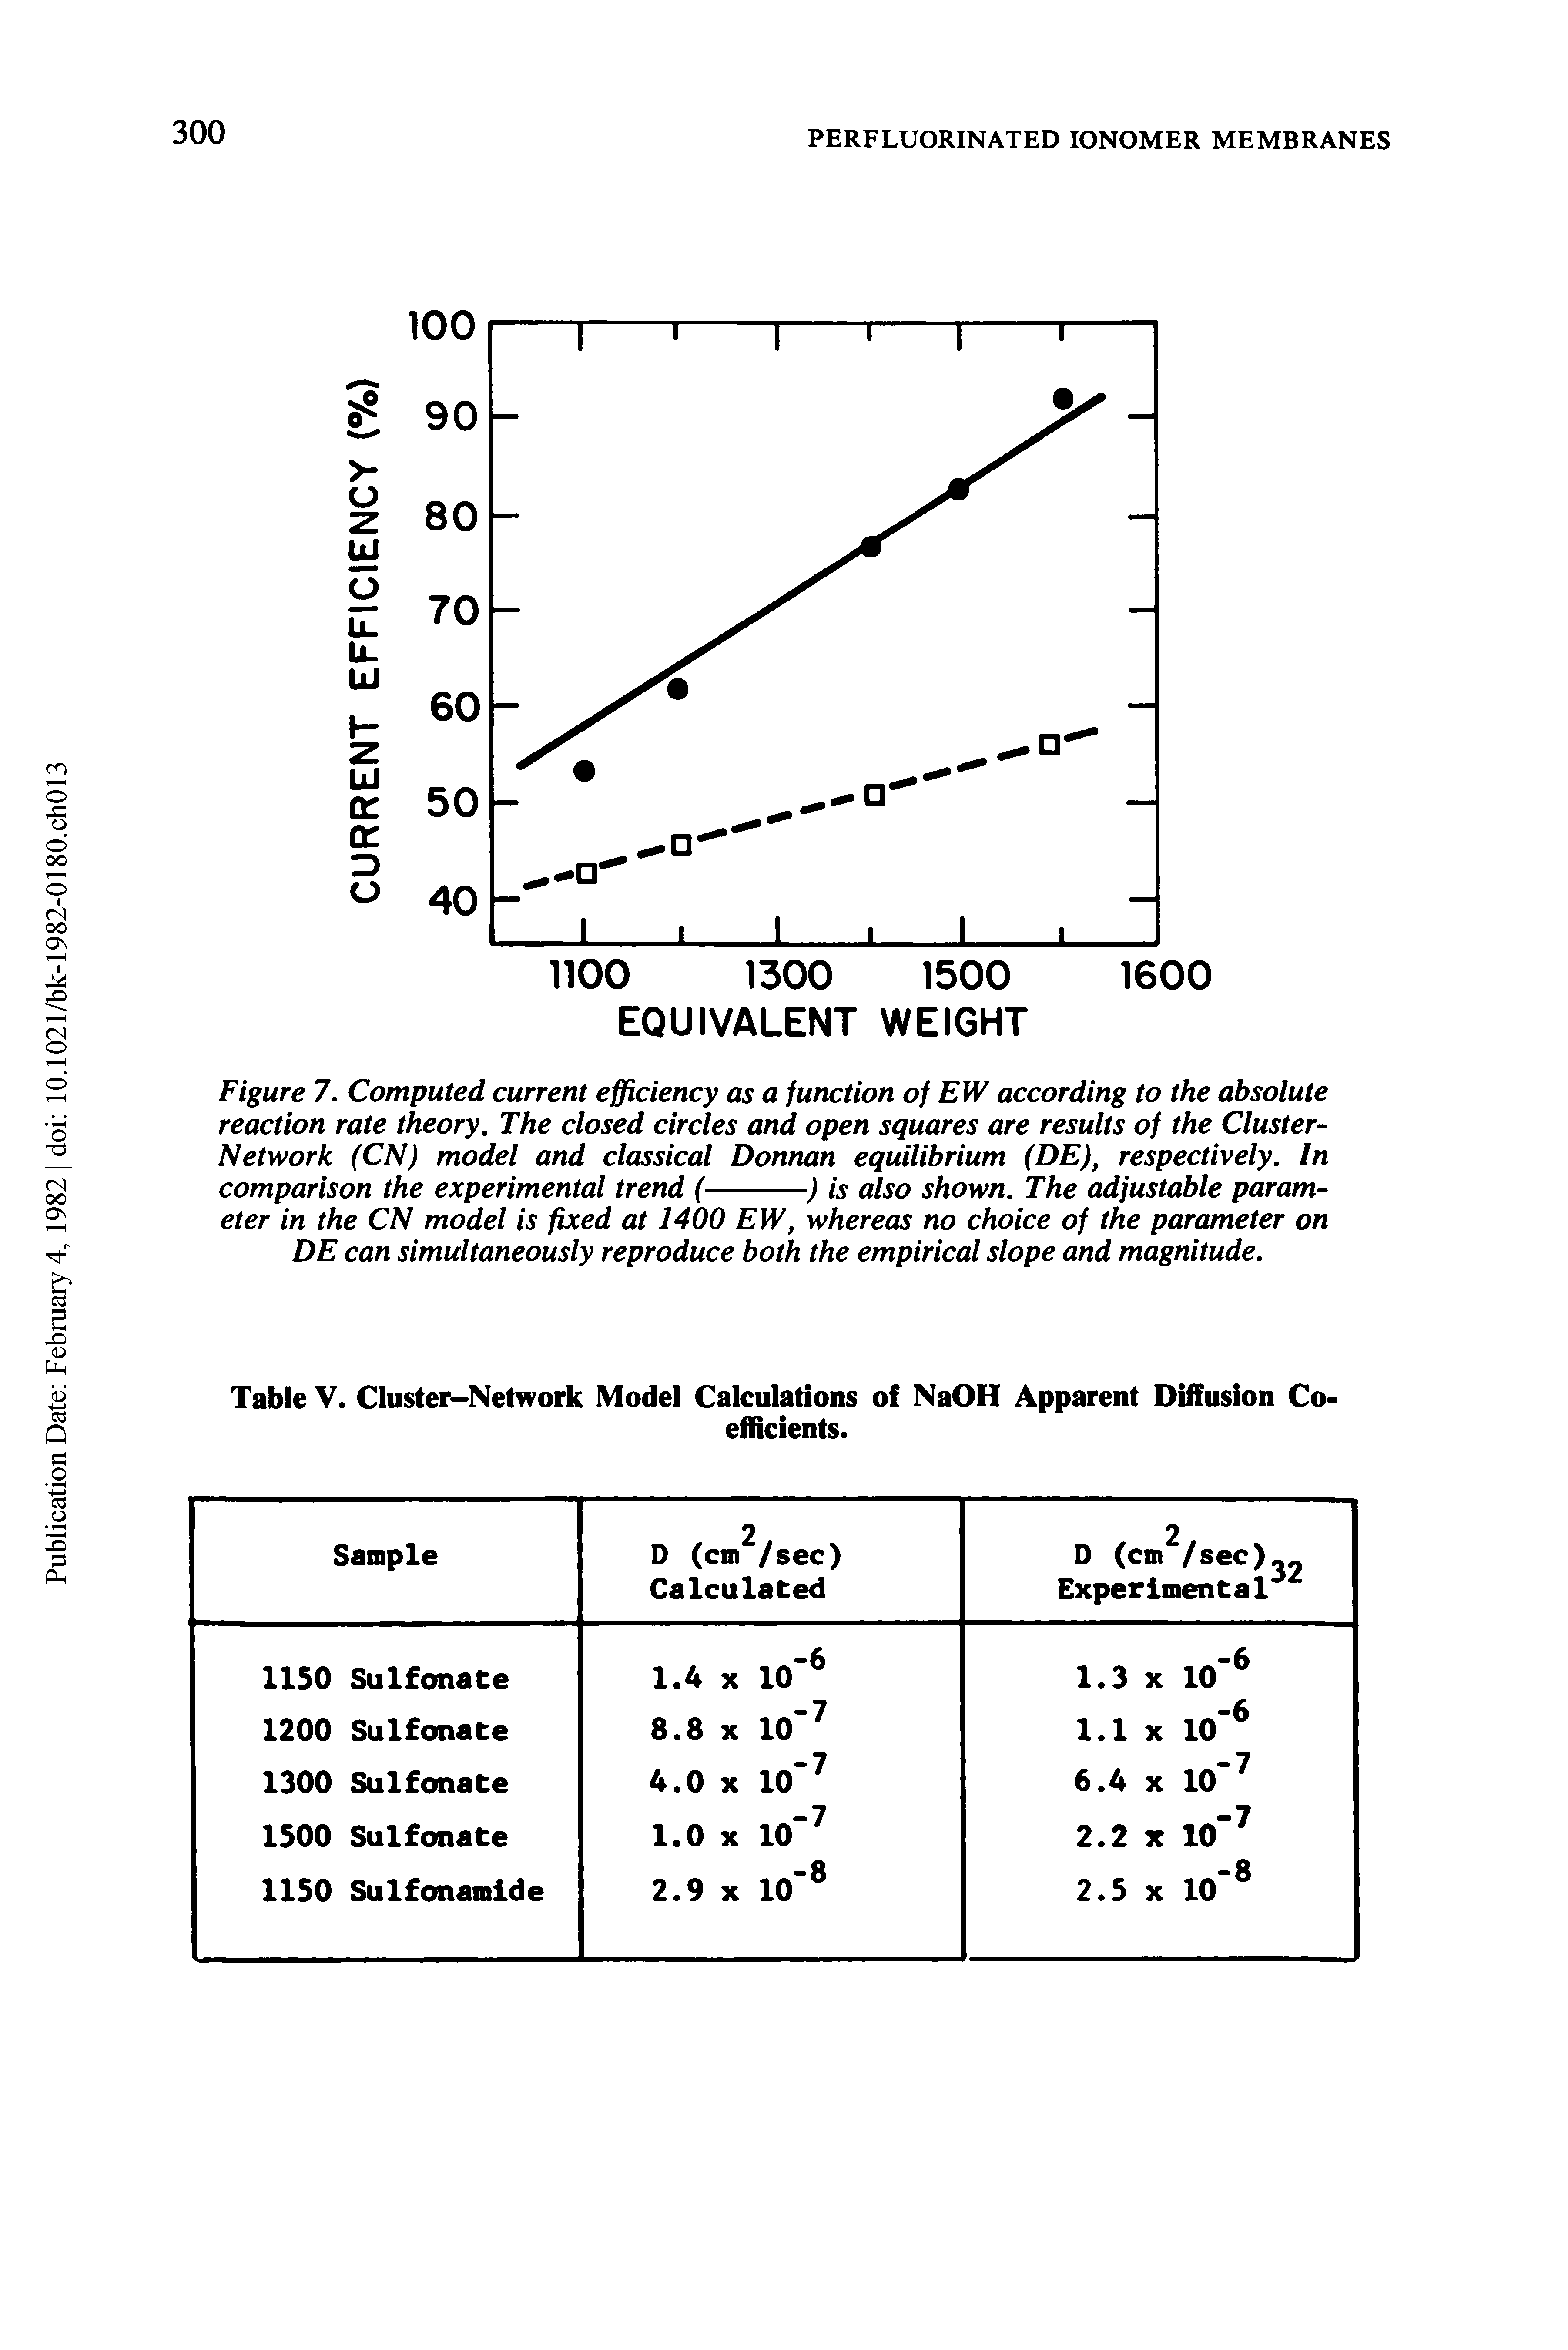 Figure 7. Computed current efficiency as a function of EW according to the absolute reaction rate theory. The closed circles and open squares are results of the Cluster-Network (CN) model and classical Donnan equilibrium (DE), respectively. In comparison the experimental trend (----------) is also shown. The adjustable param-...